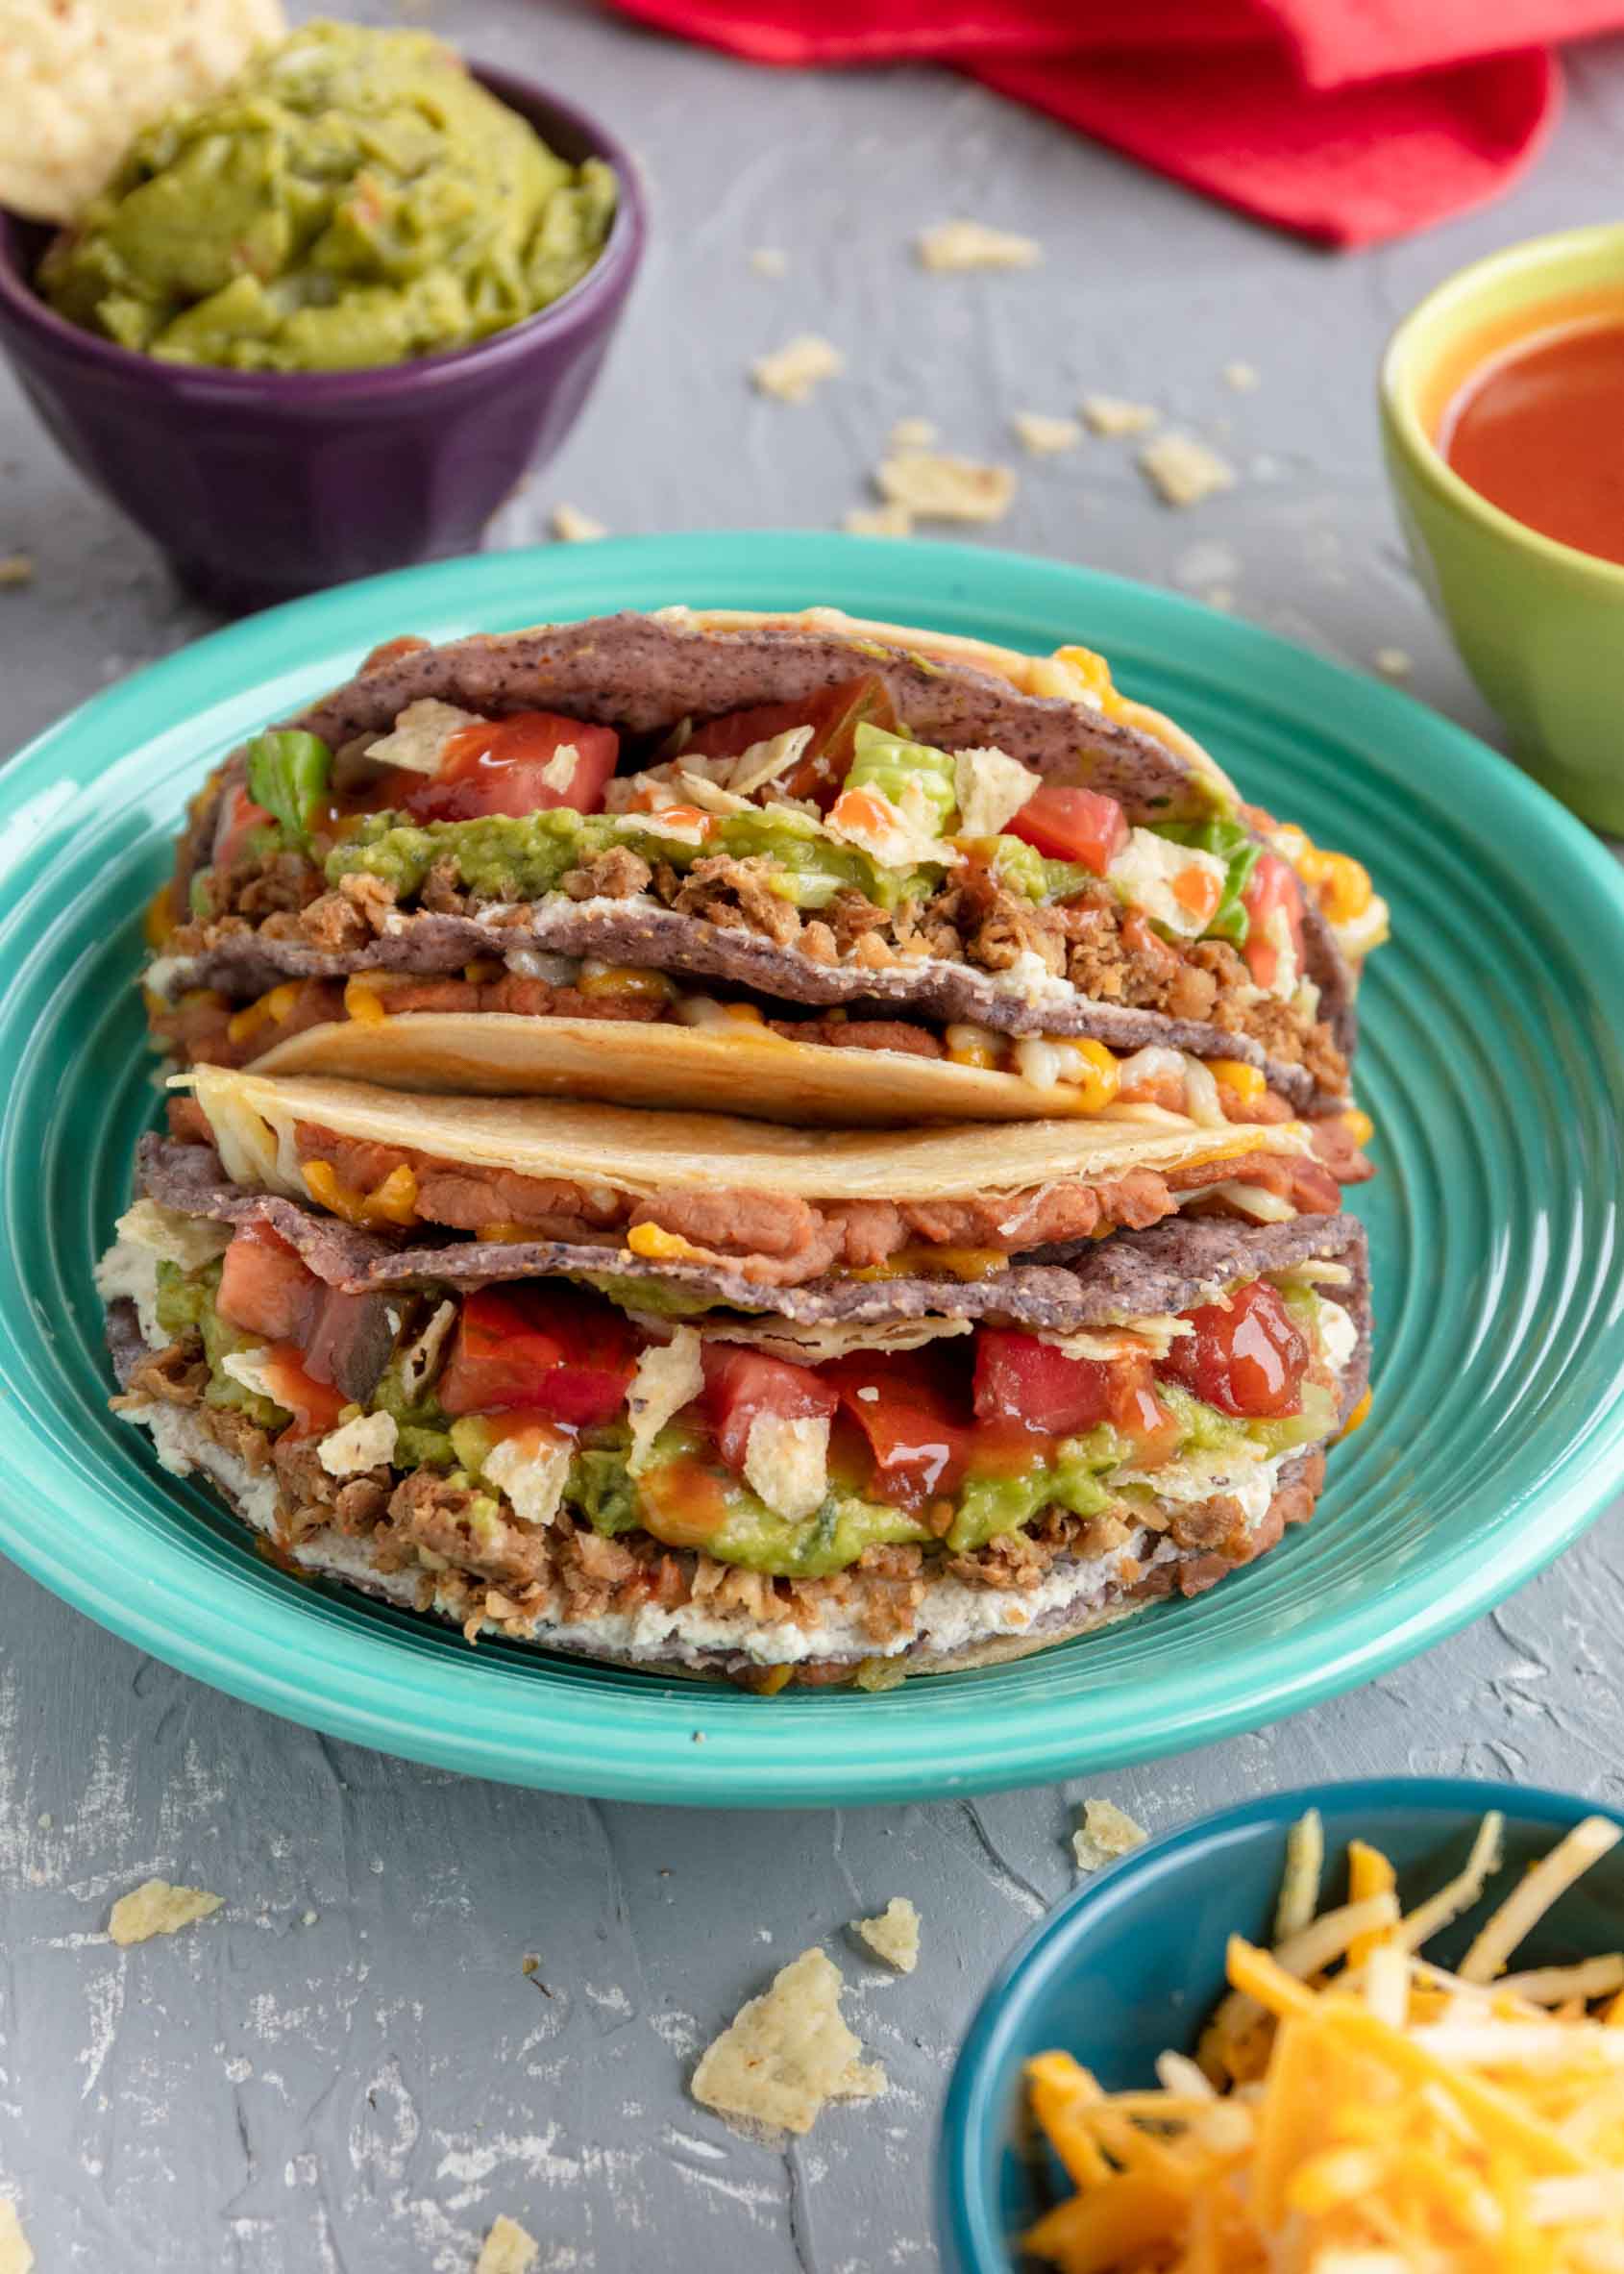 two vegan stuffed grilled tacos on a plate